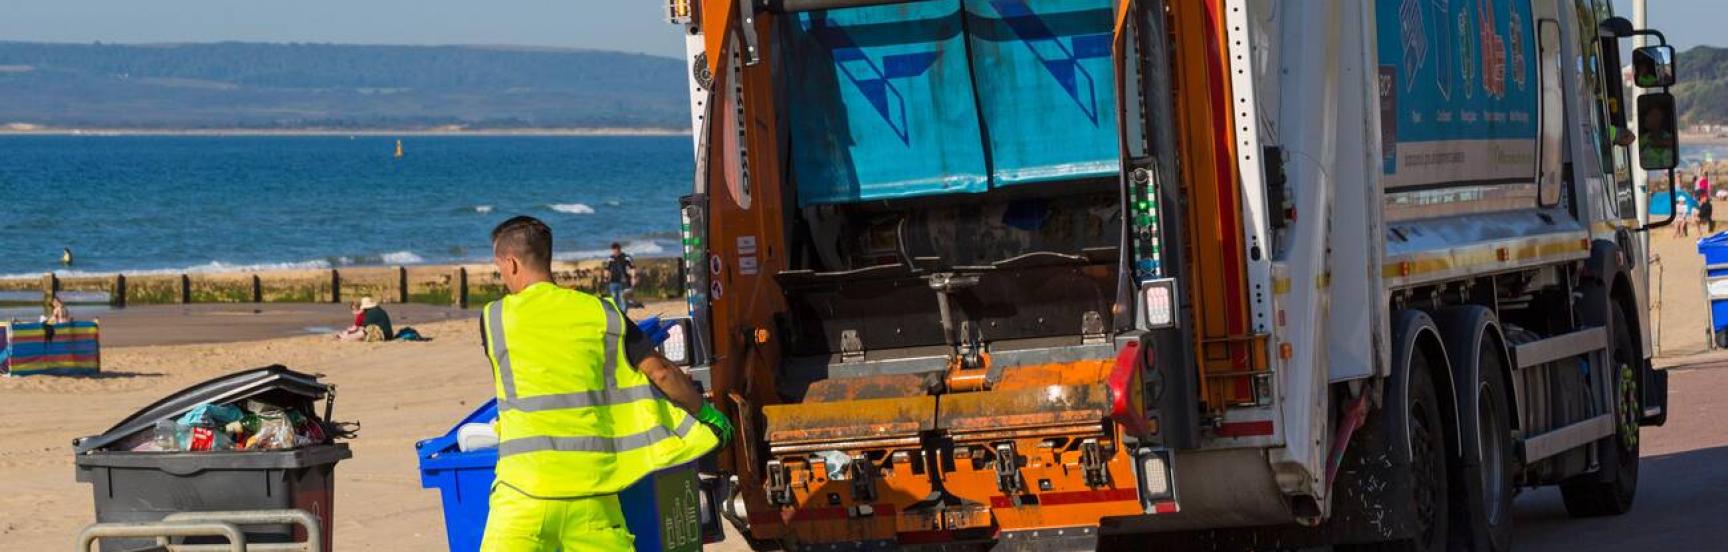 Refuse worker collects rubbish along Bournemouth seafront